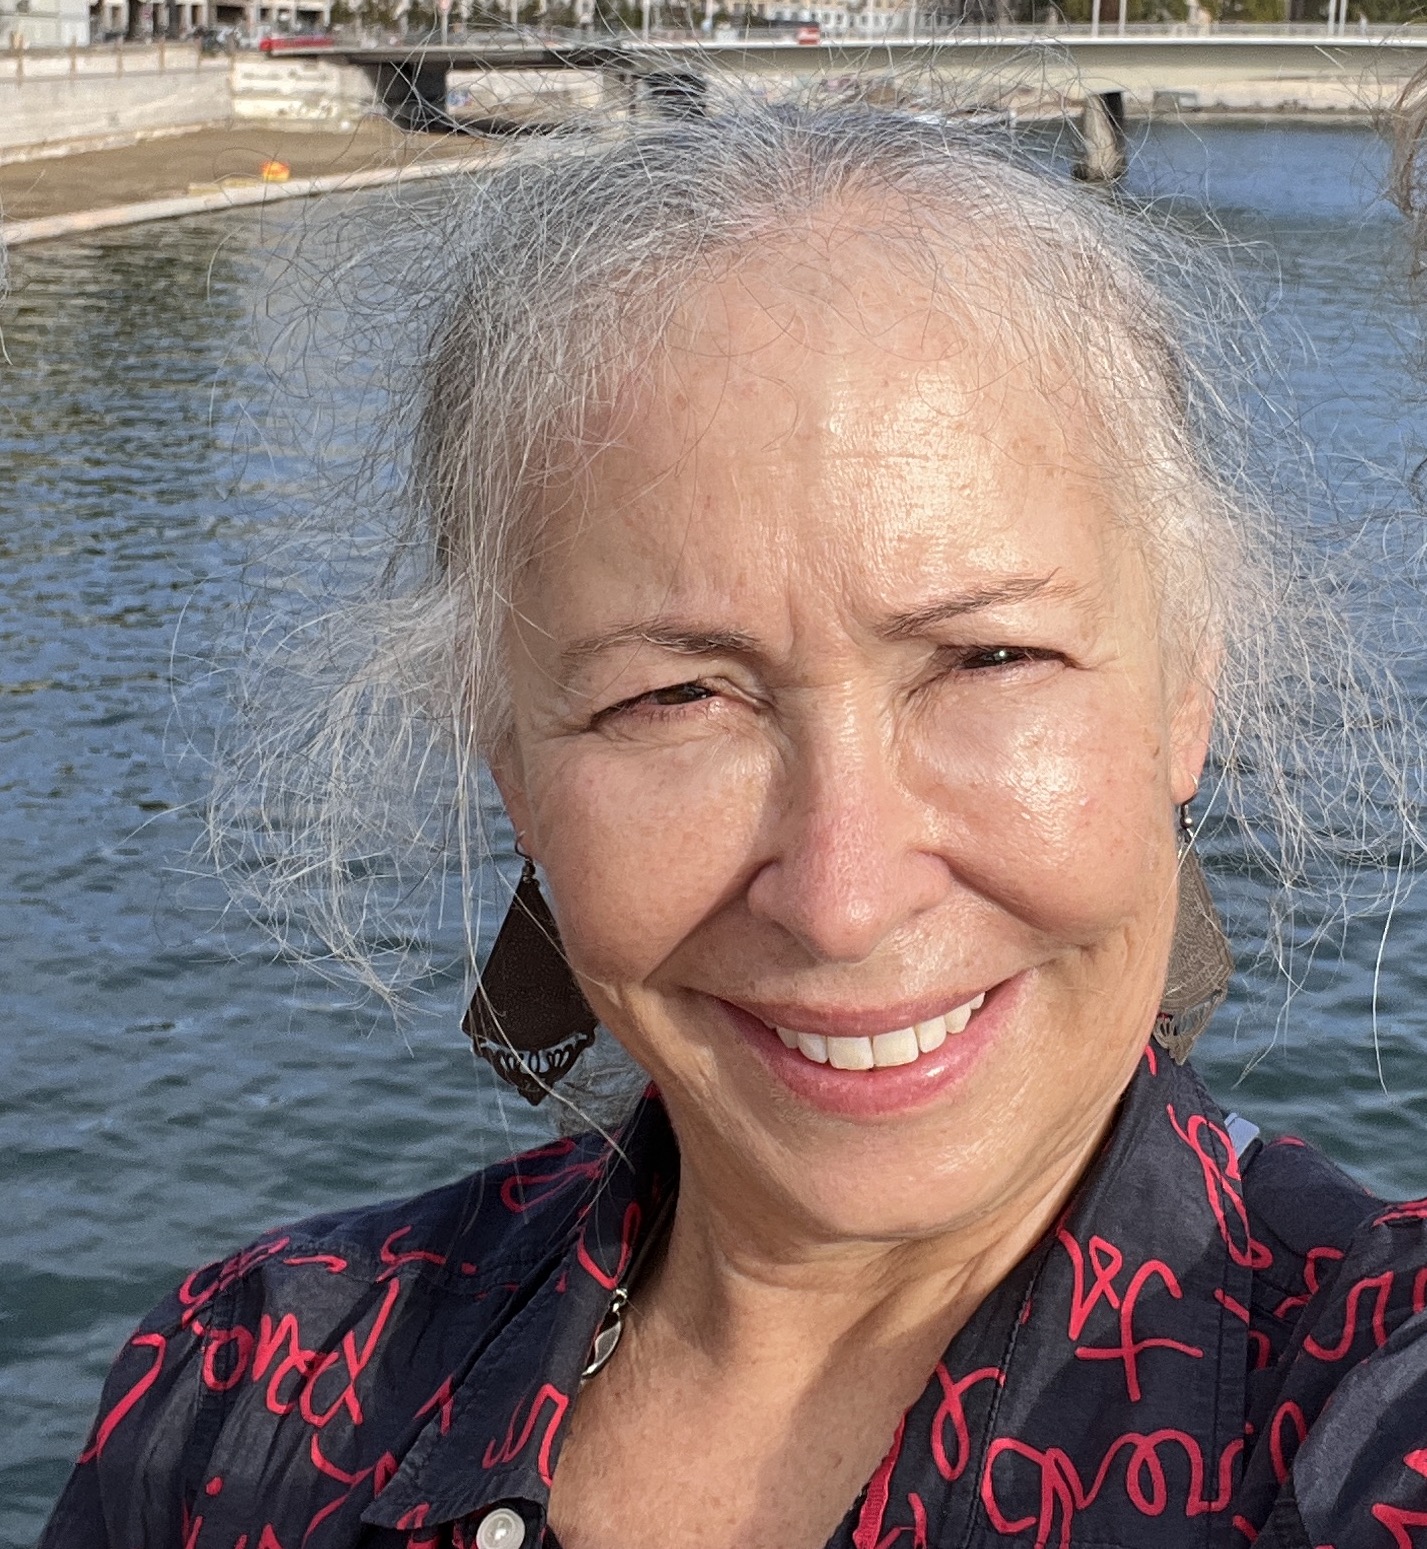 selfie of Ms. Leslie taken in Annecy, France as she squints facing the sun with backdrop of bridge over river